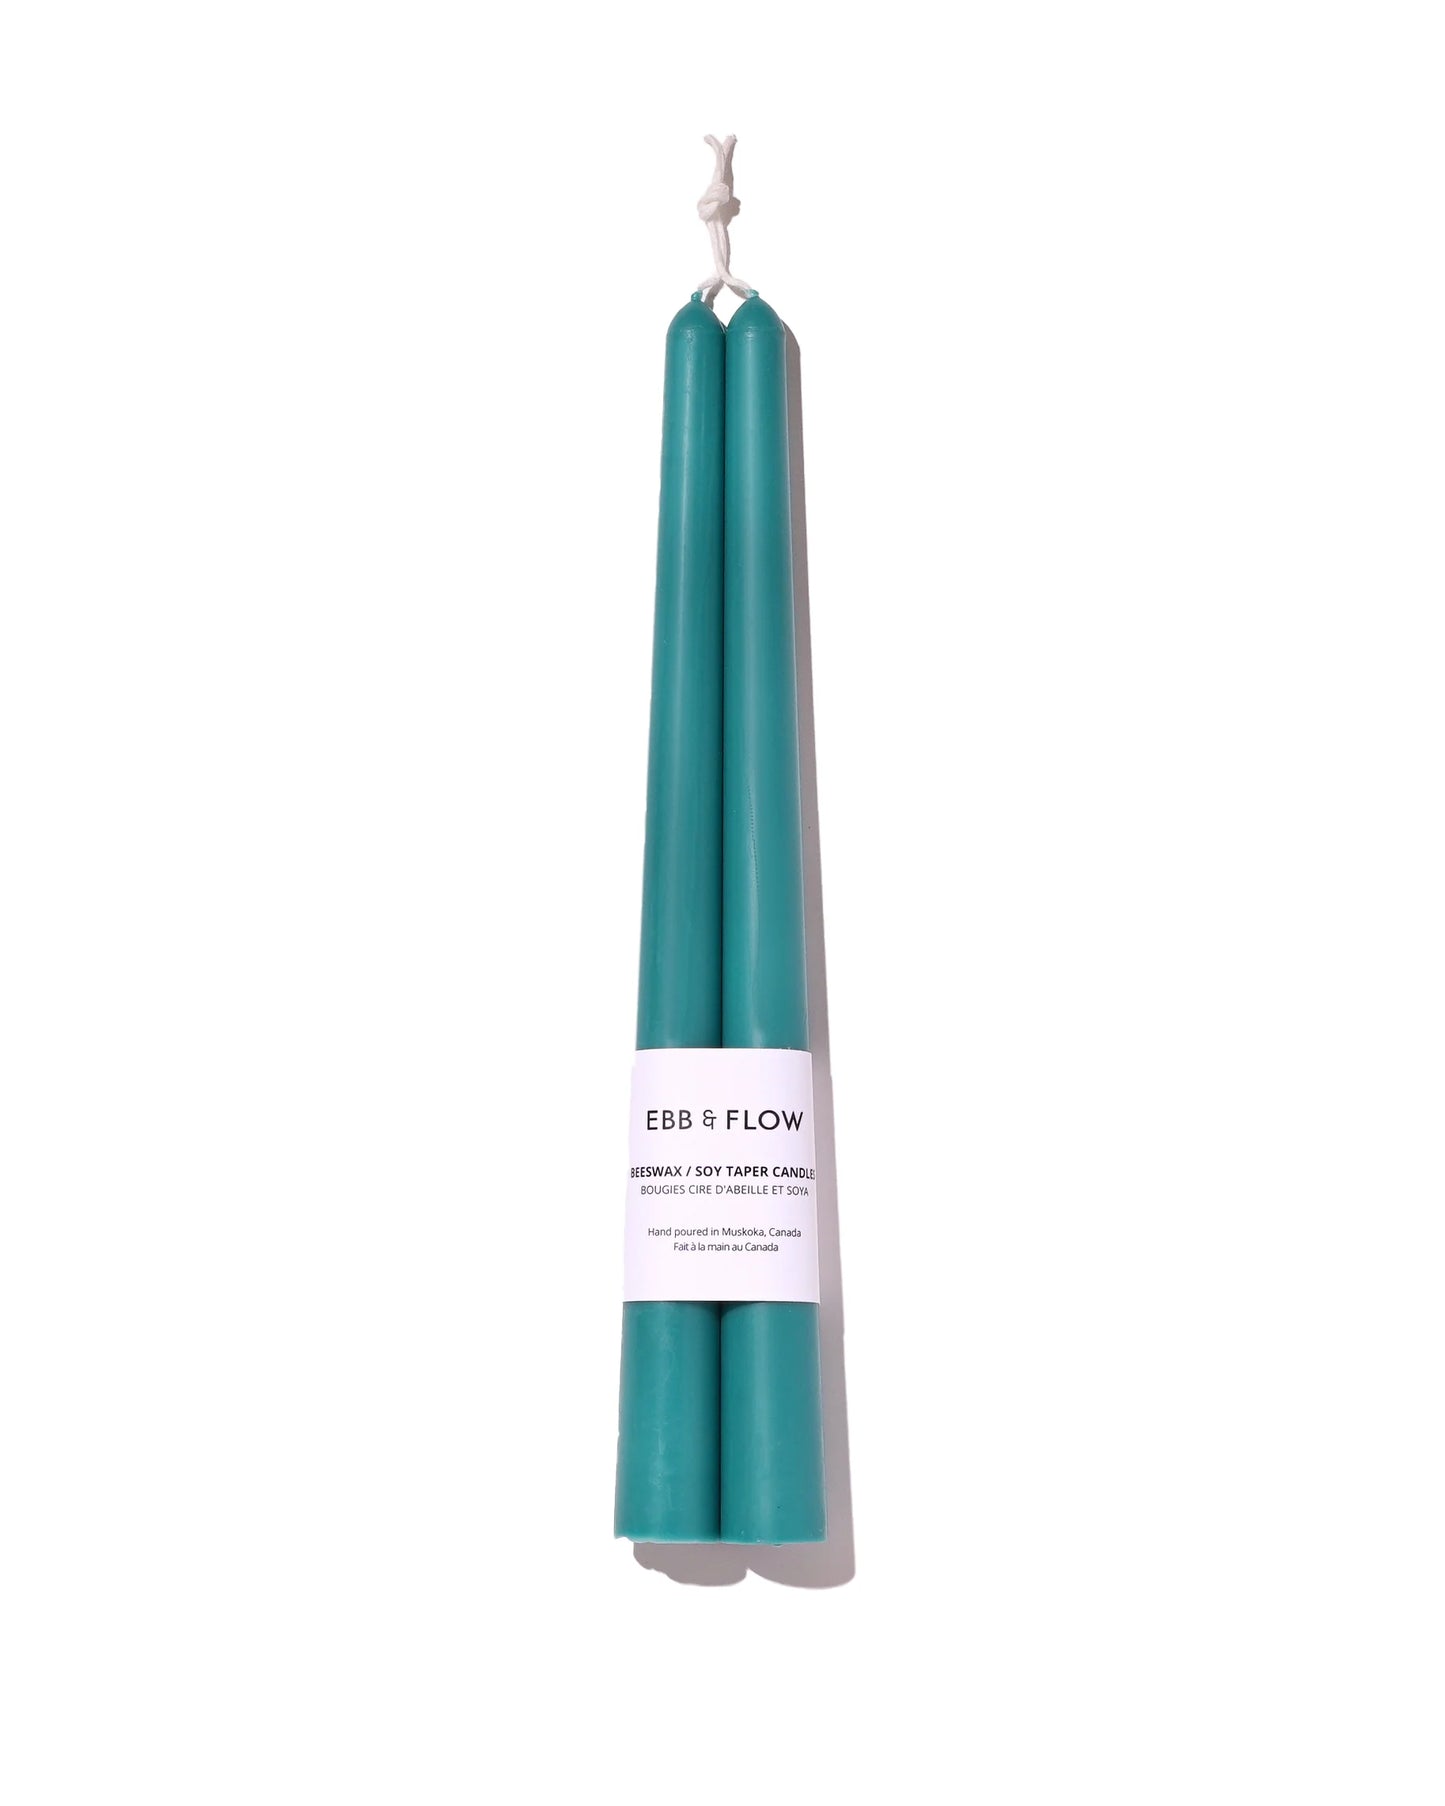 Beeswax / Soy Taper Candles Jade Green